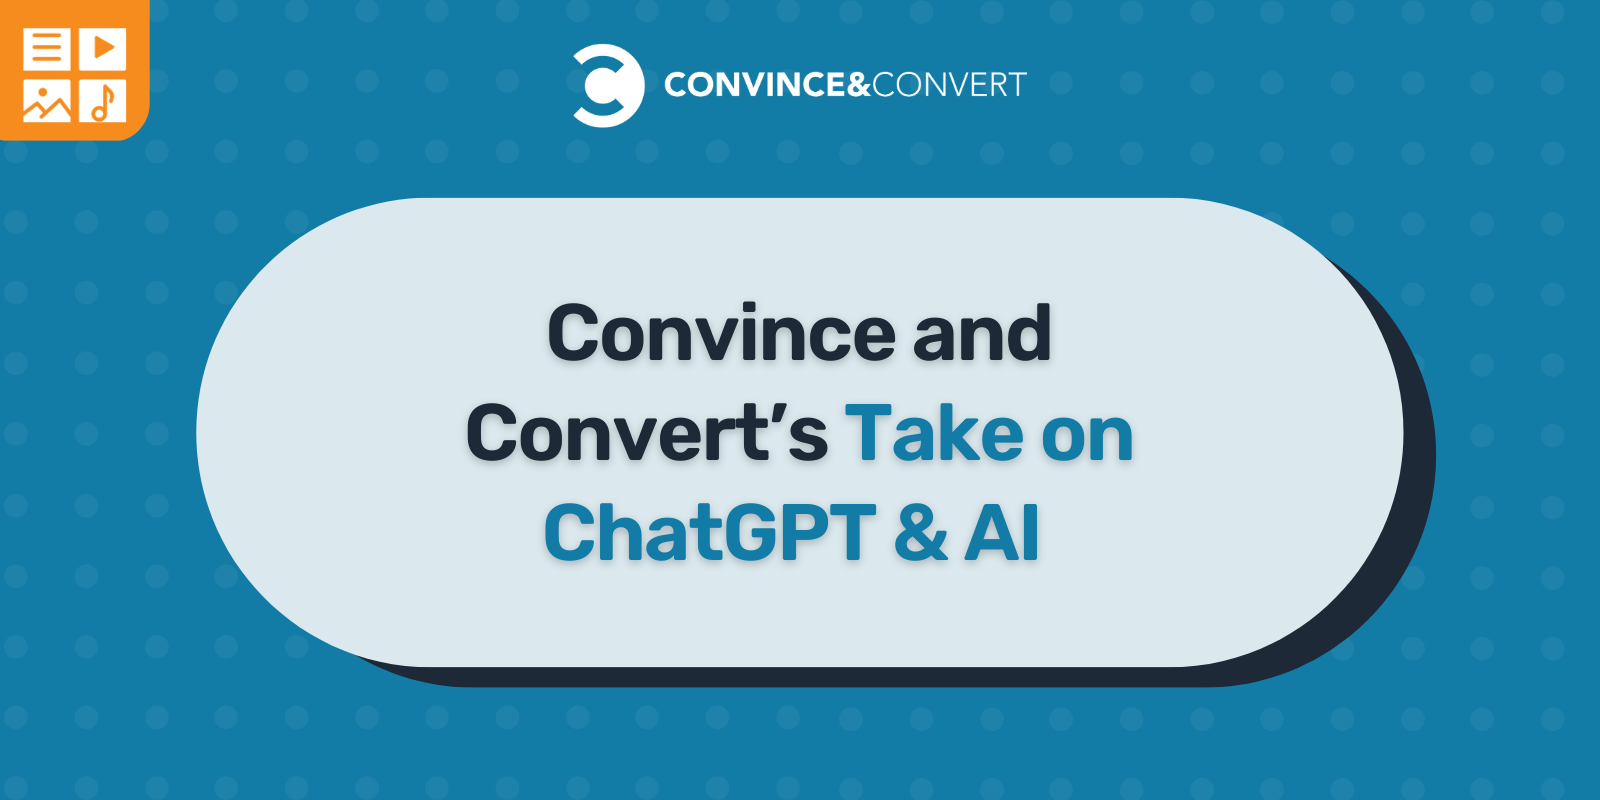 You are currently viewing Convince and Convert’s Take on ChatGPT & AI